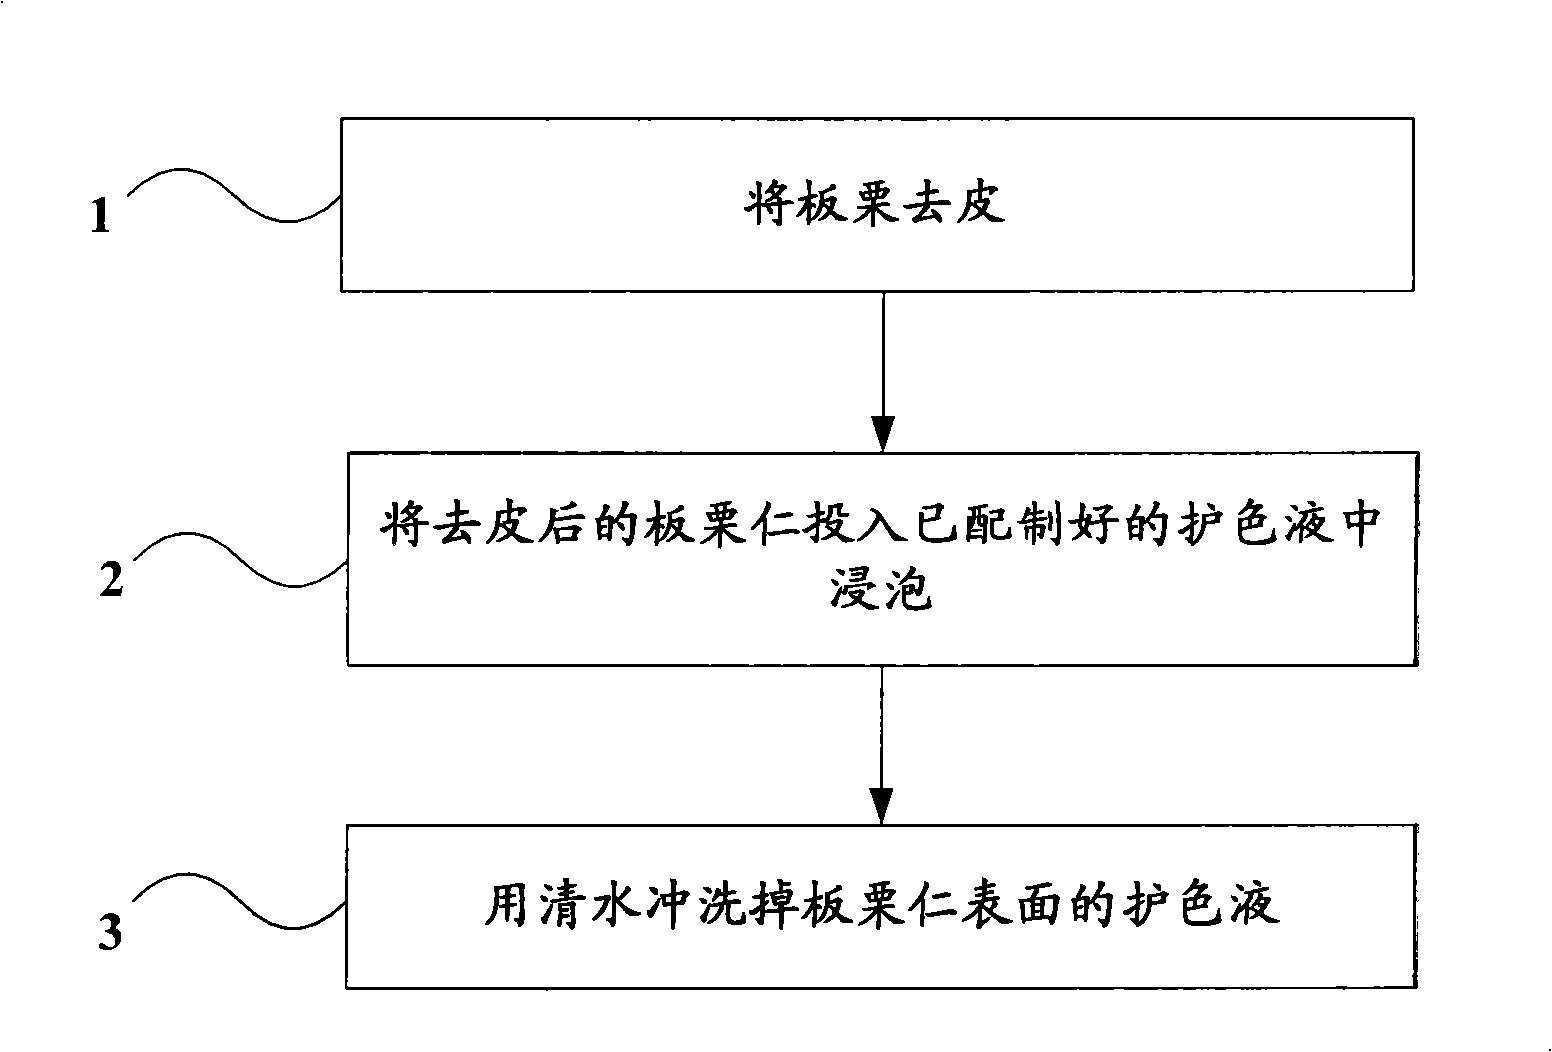 Method for controlling browning of Chinese chestnut